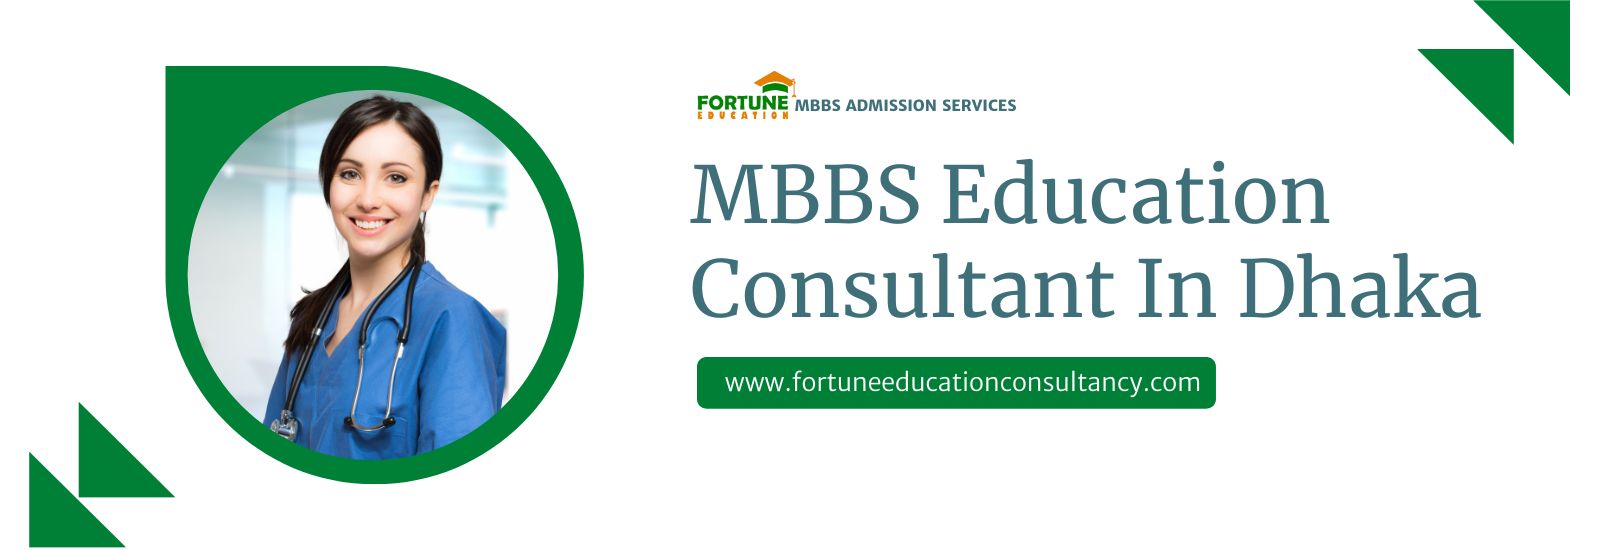 MBBS Education Consultant In Dhaka